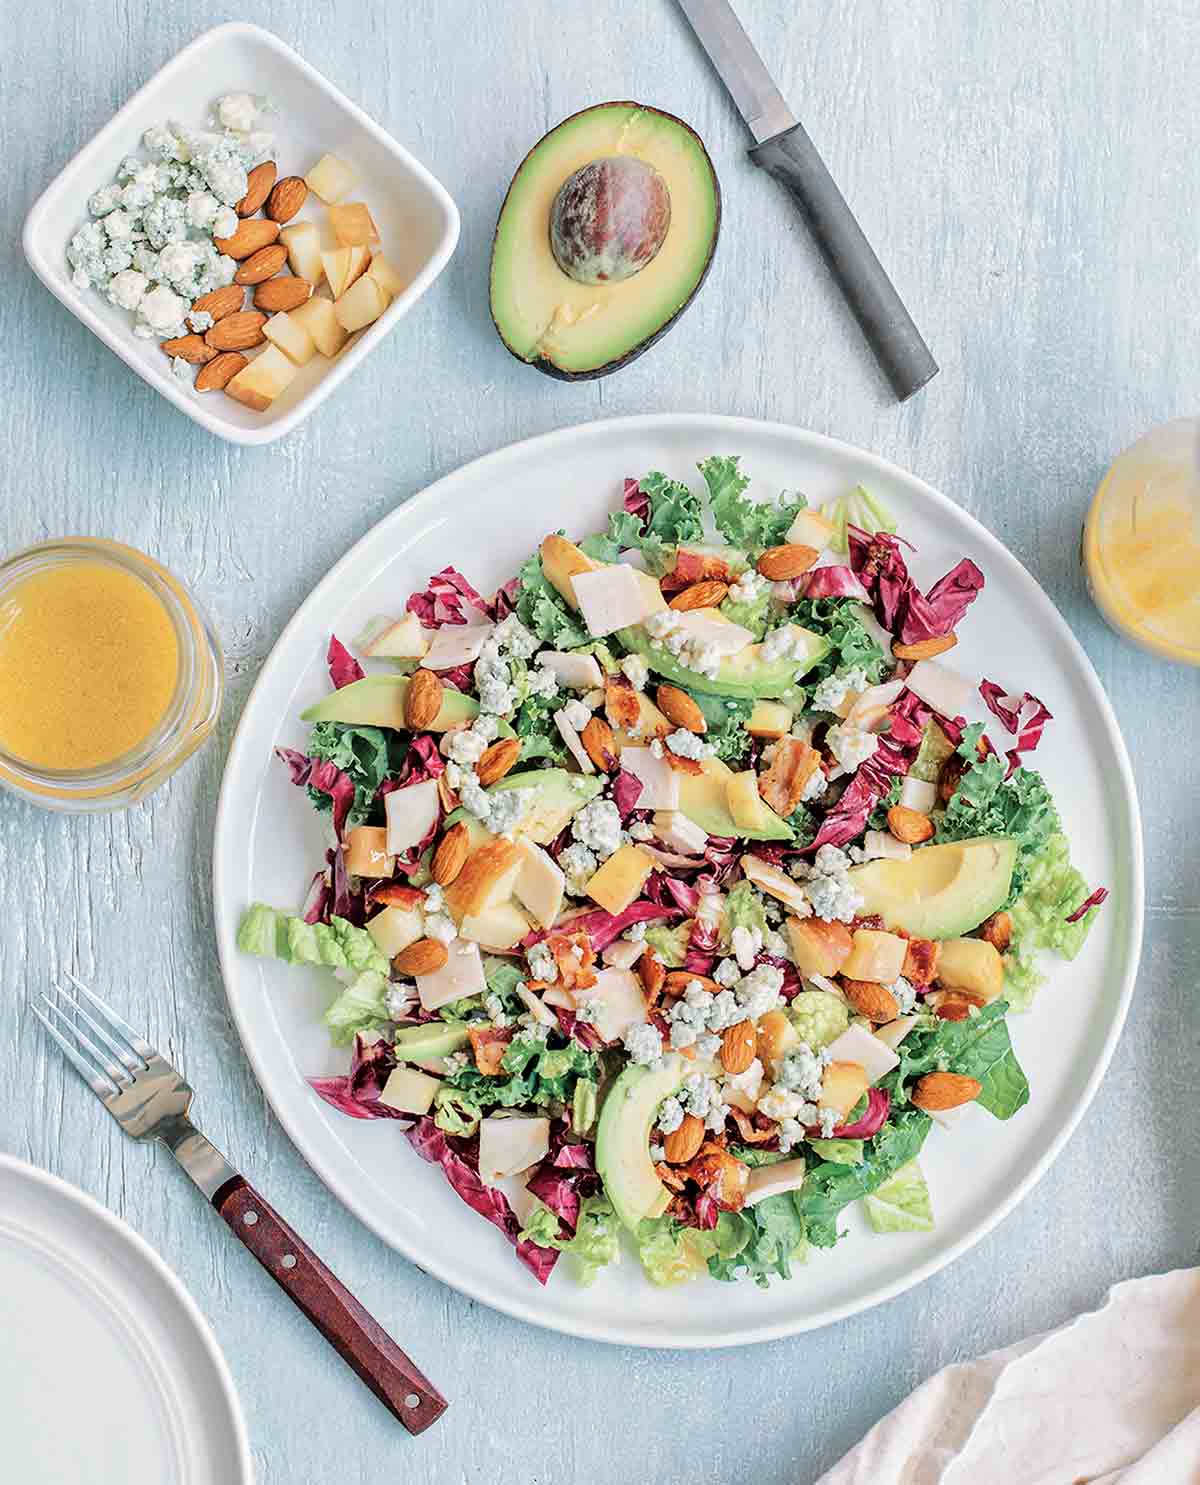 Chopped salad on a white plate, with a fork and knife, halved avocado, and dish of blue cheese, almonds, and apple on the side.